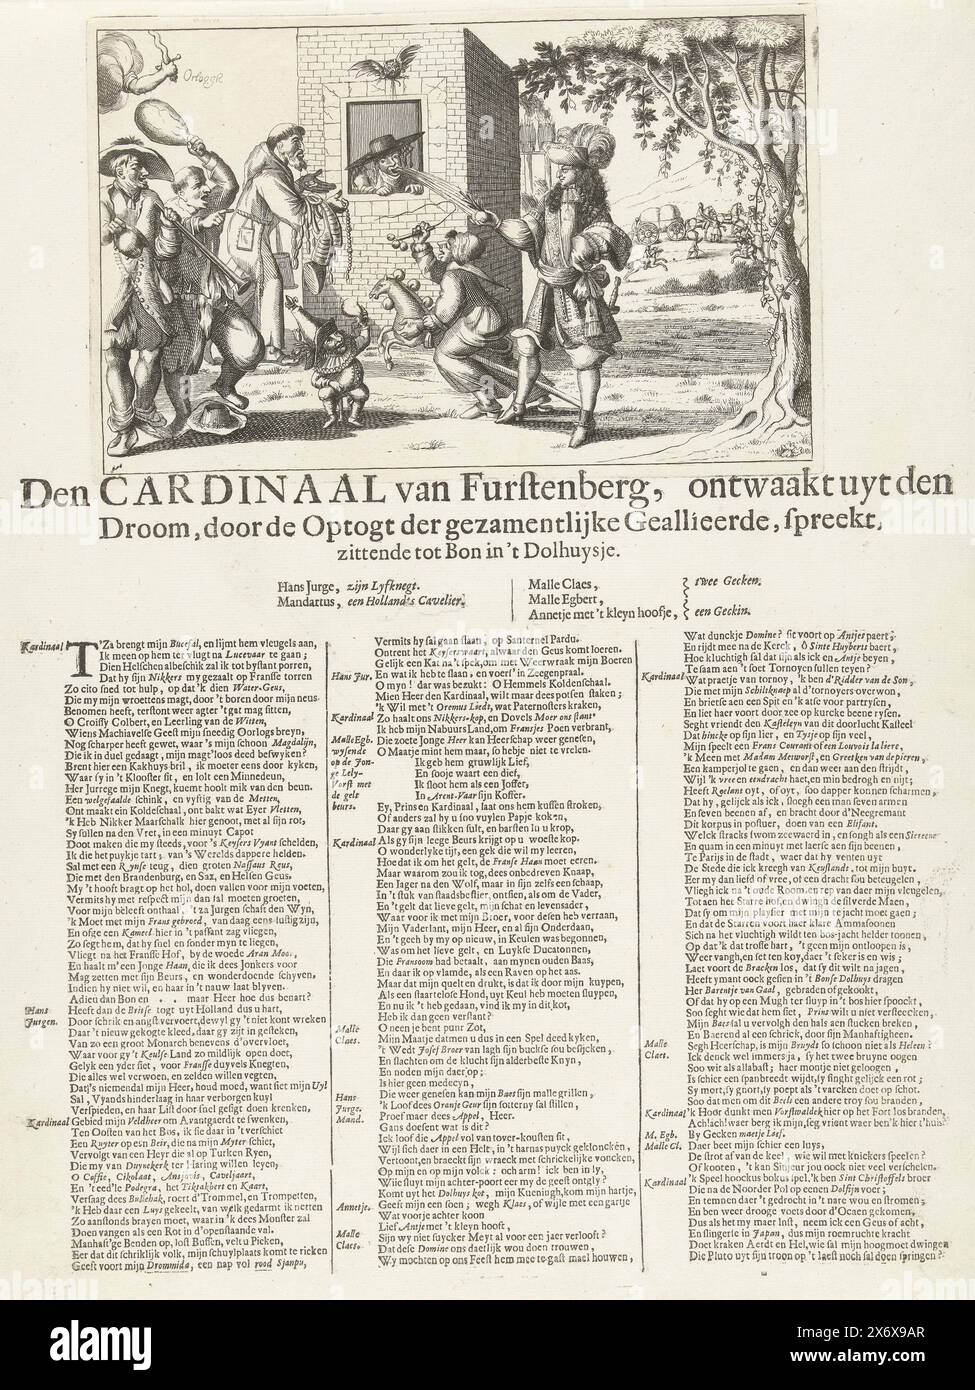 Cartoon on Prince Wilhelm von Fürstenberg, 1674, The Cardinal of Furstenberg, awakens from the Dream, by the Optogt of the joint Allied, speaks sitting to Bon in 't Dolhuysje (title on object), Cartoon on the Cardinal Prince Wilhelm von Fürstenberg after the the conclusion of peace with England by the Republic on February 19, 1674 and the capture of Prince von Fürstenberg on February 16, 1674. The cardinal at the window in an insane asylum, outside three madmen, a monk and the Dutch nobleman who offers him an orange apple . With a spot verse in 3 columns., print, print maker: anonymous Stock Photo